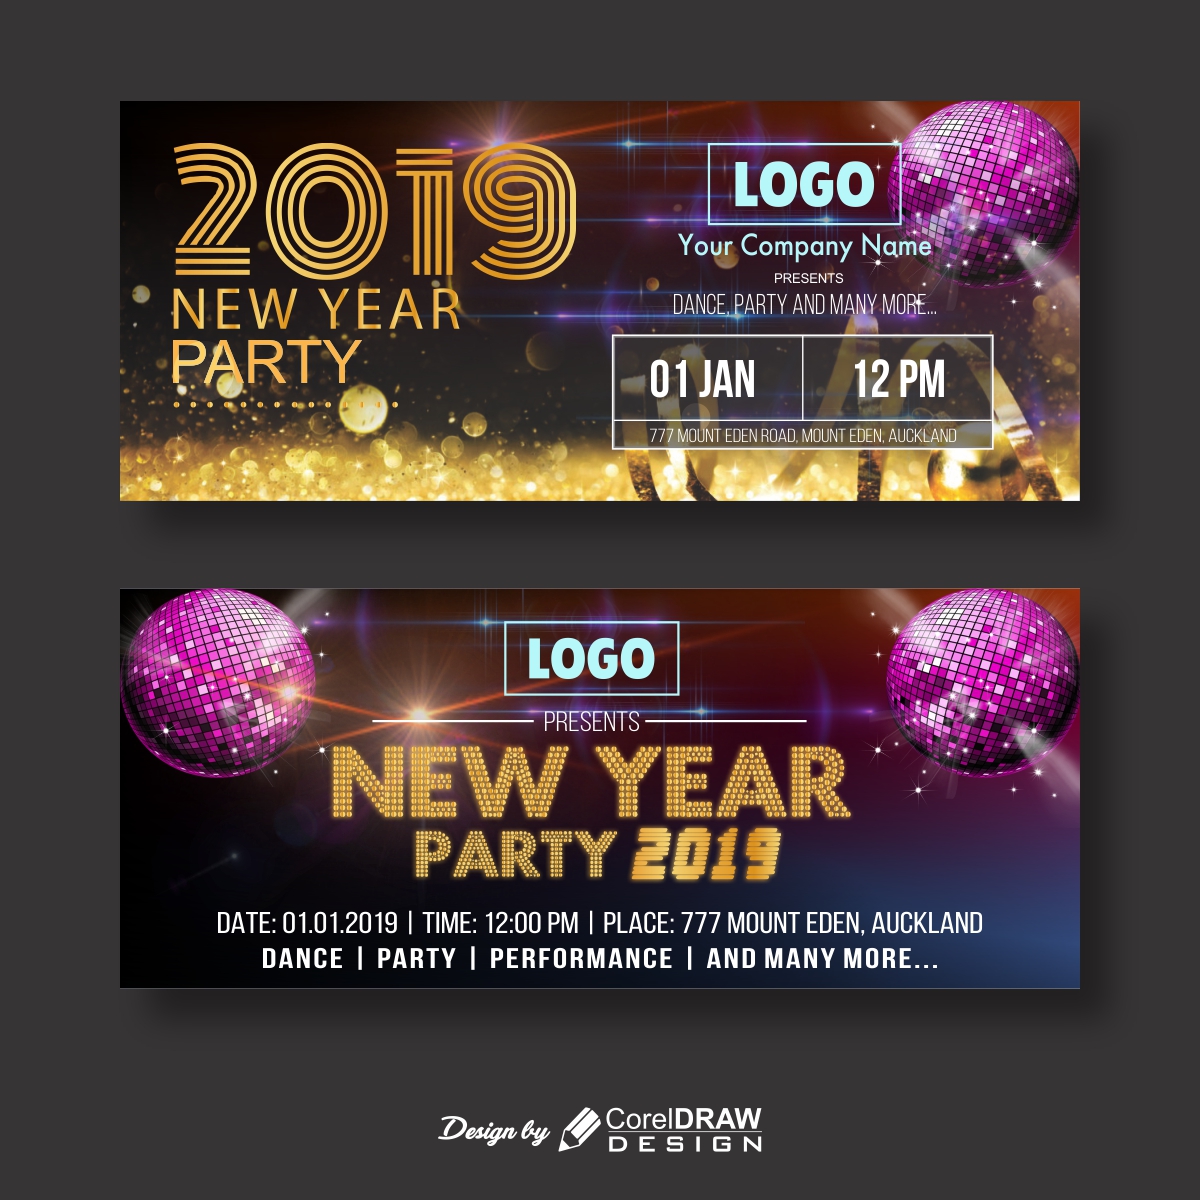 Shiny New Year Party Banner with images